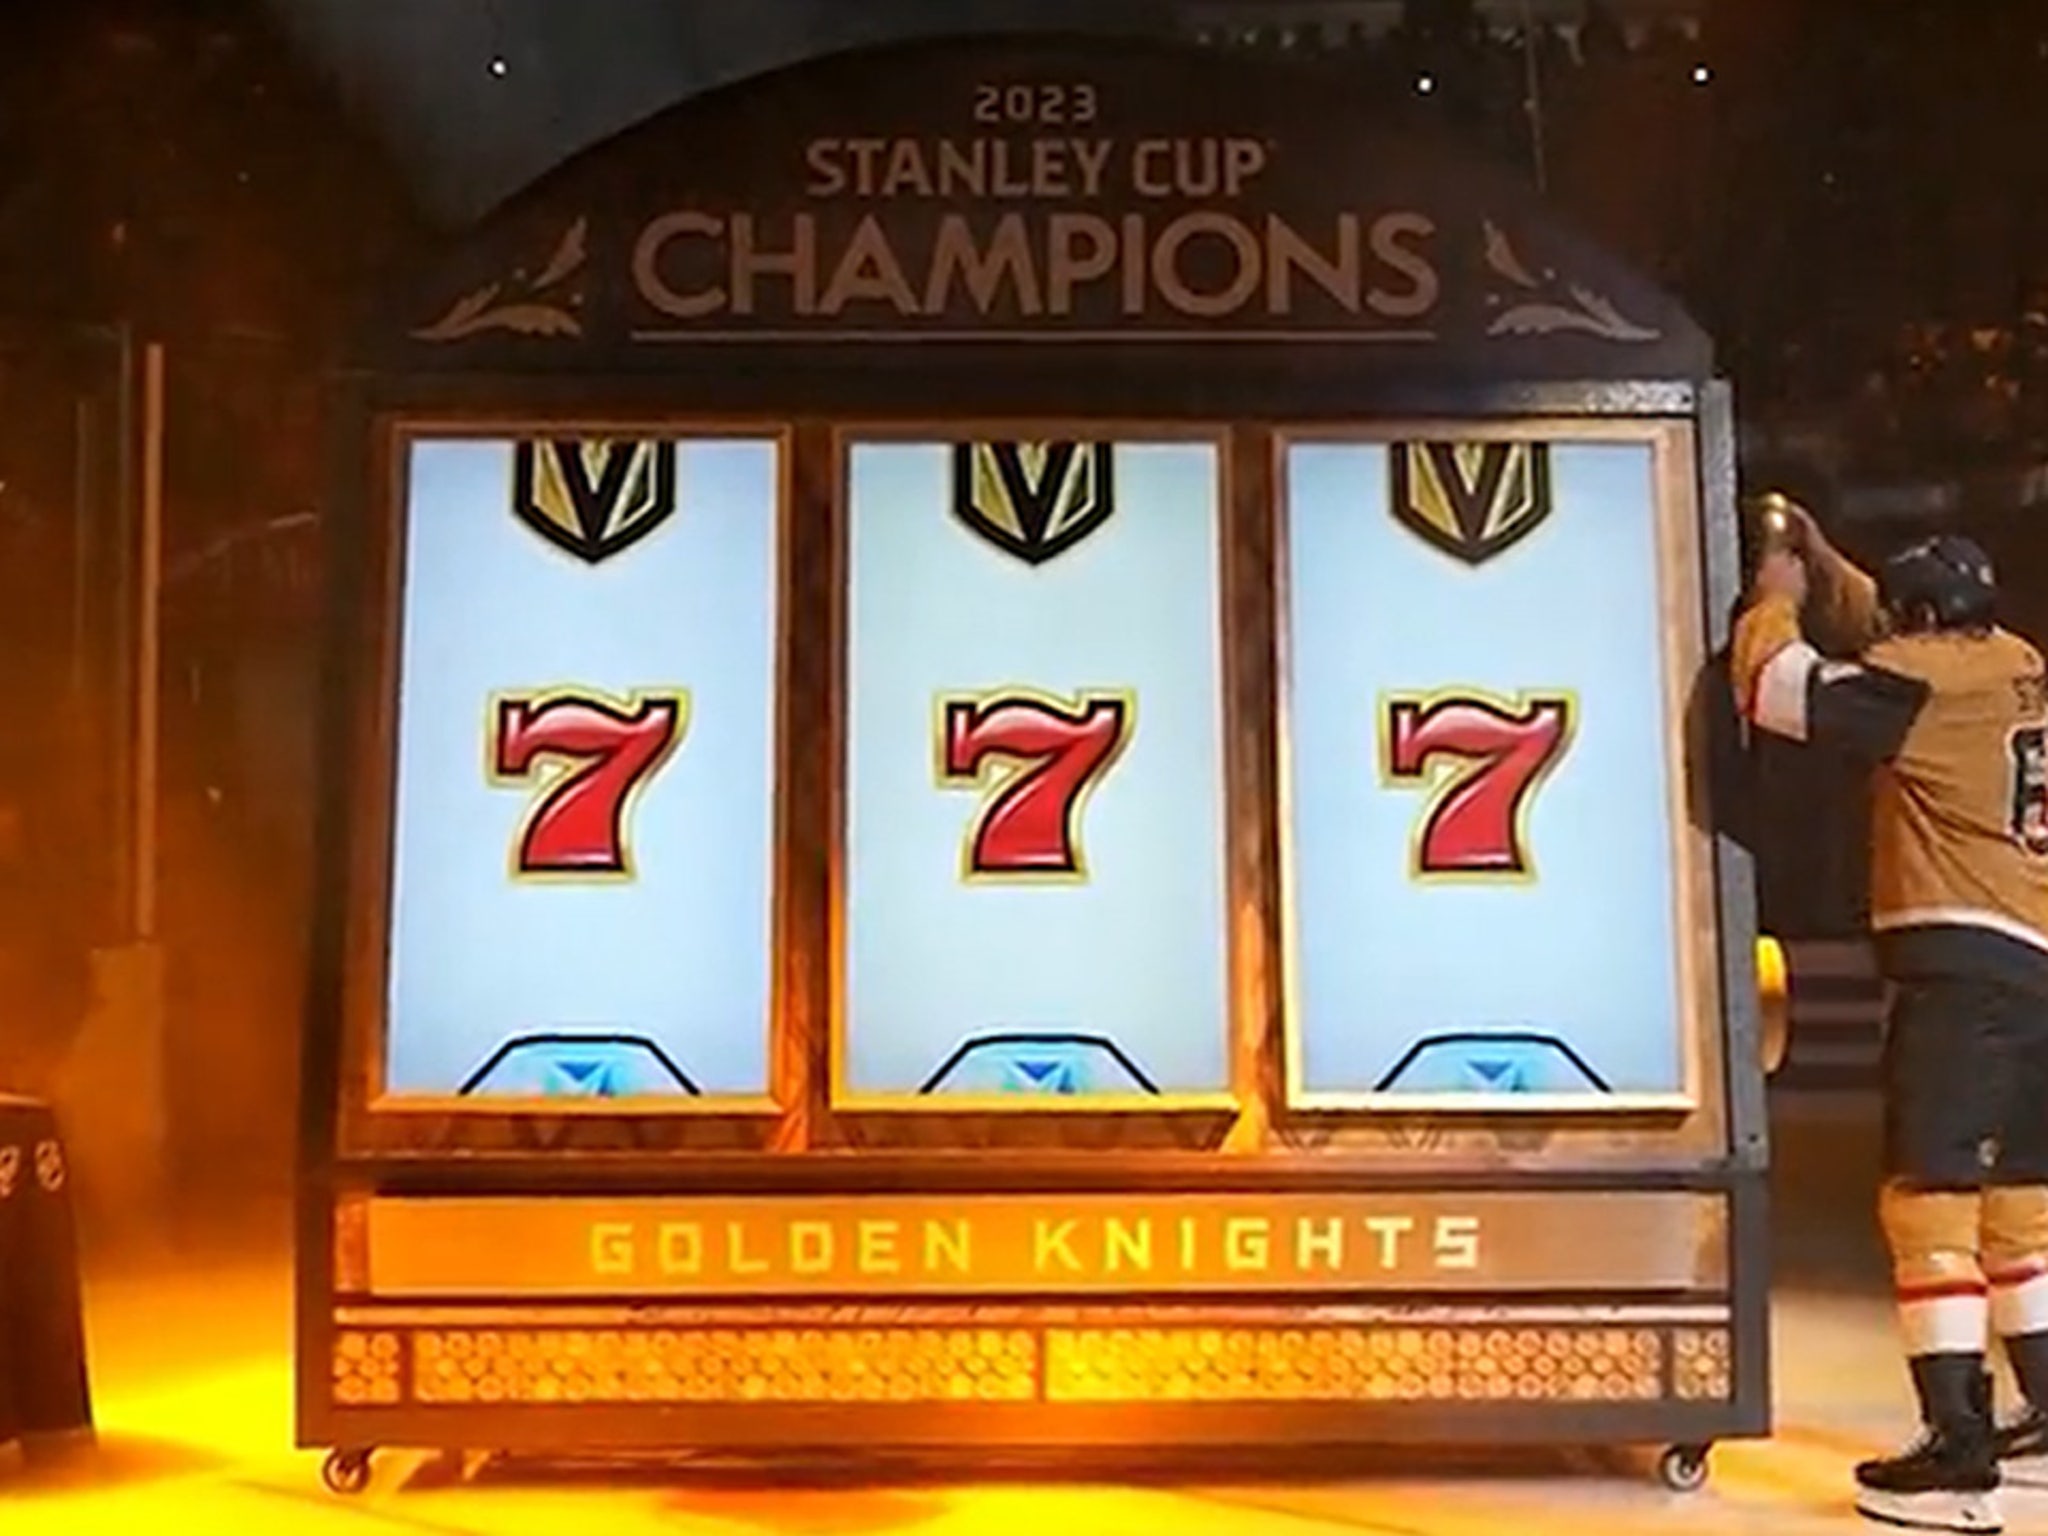 Golden Knights raise Stanley Cup championship banner before season opener